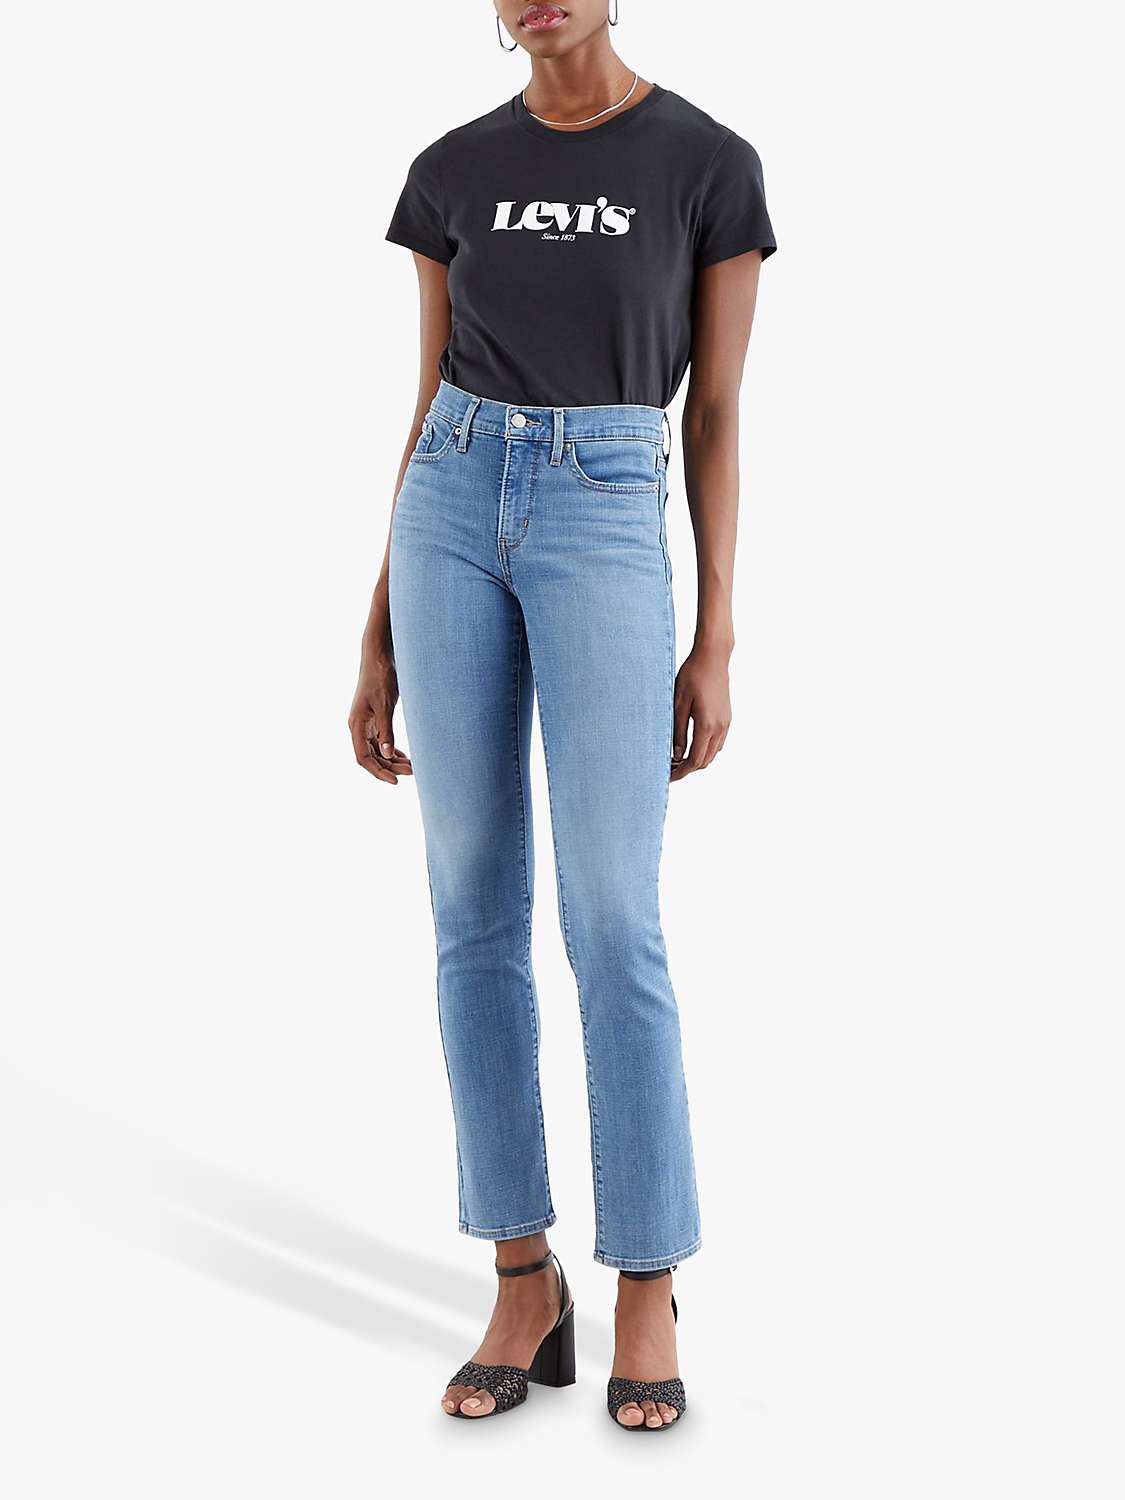 Buy Levi's 314 Shaping Straight Cut Jeans, Slate Mystery Online at johnlewis.com